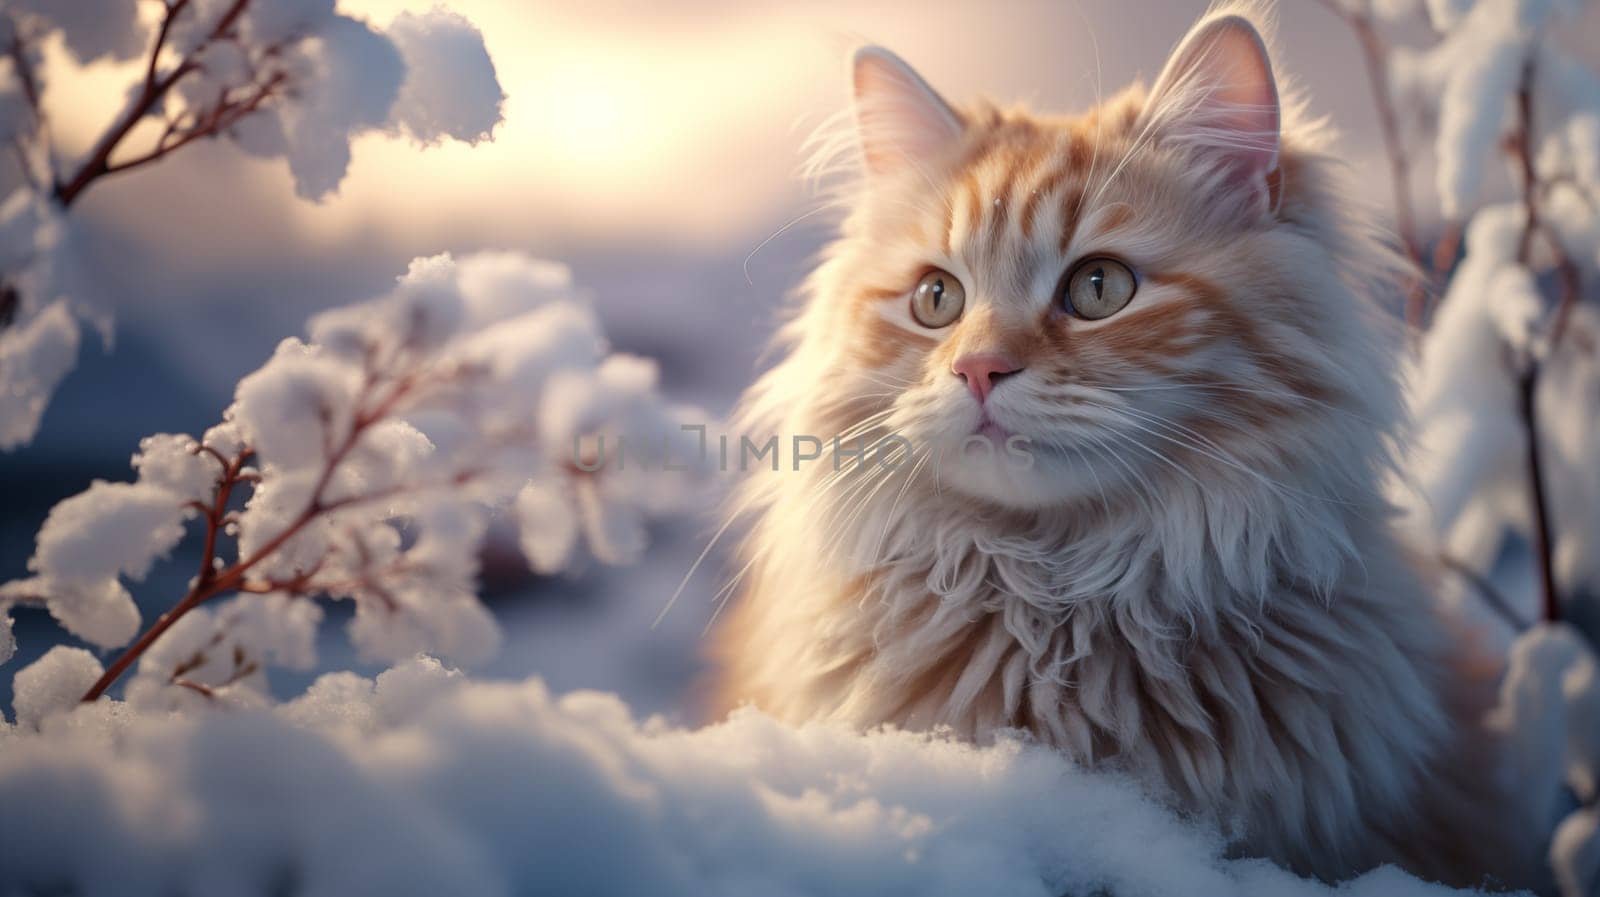 A beautiful, fluffy cat sitting on the snow in winter, at sunset, in a winter landscape. Looking away